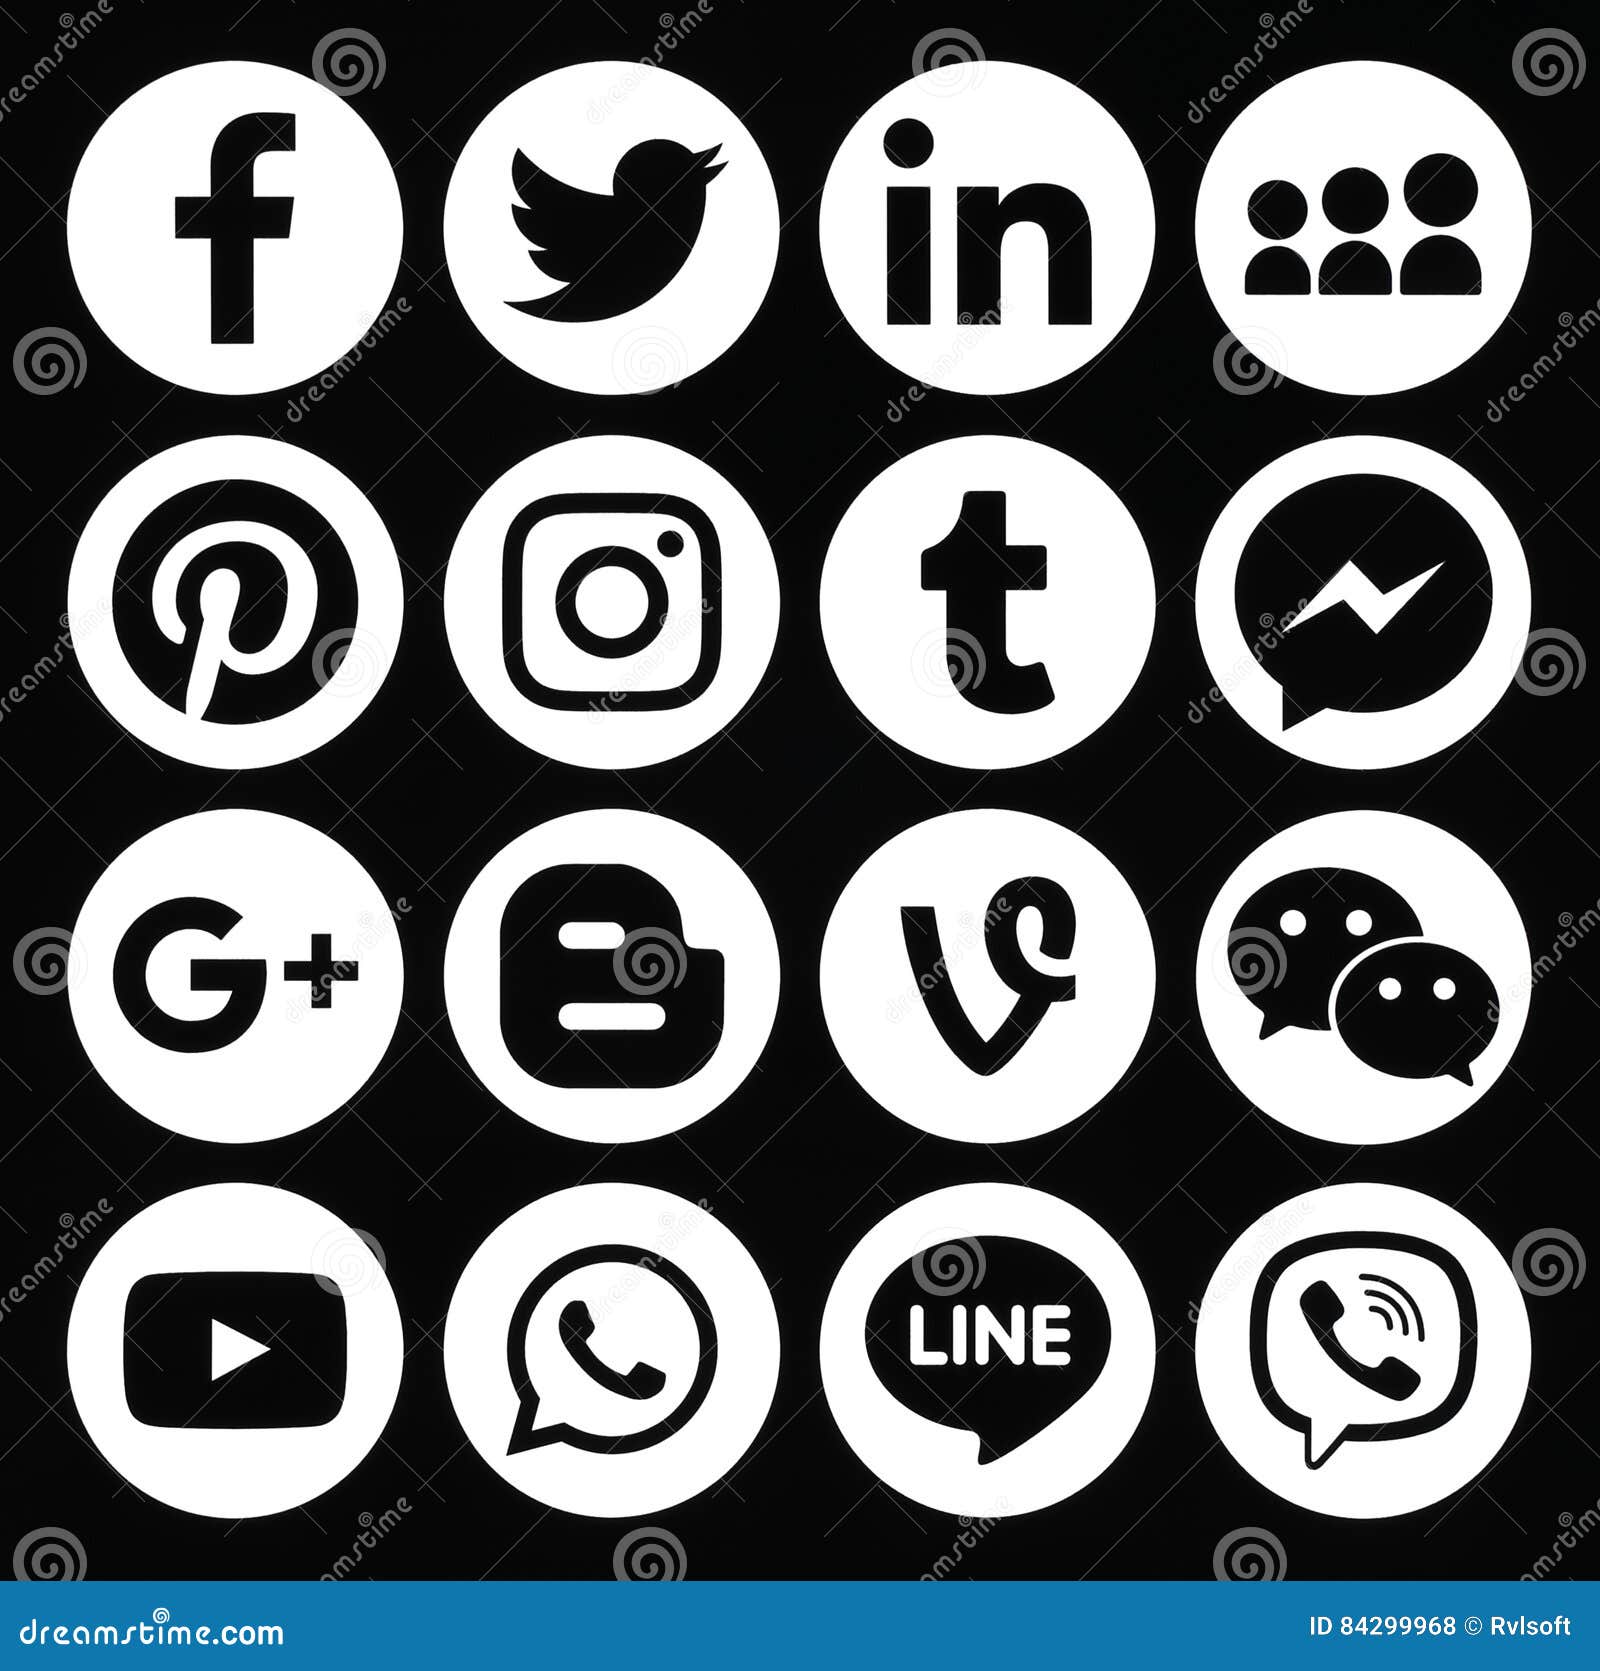 Collection Of Popular Round White Social Media Icons Editorial Stock Photo Illustration Of Camera Linkedin